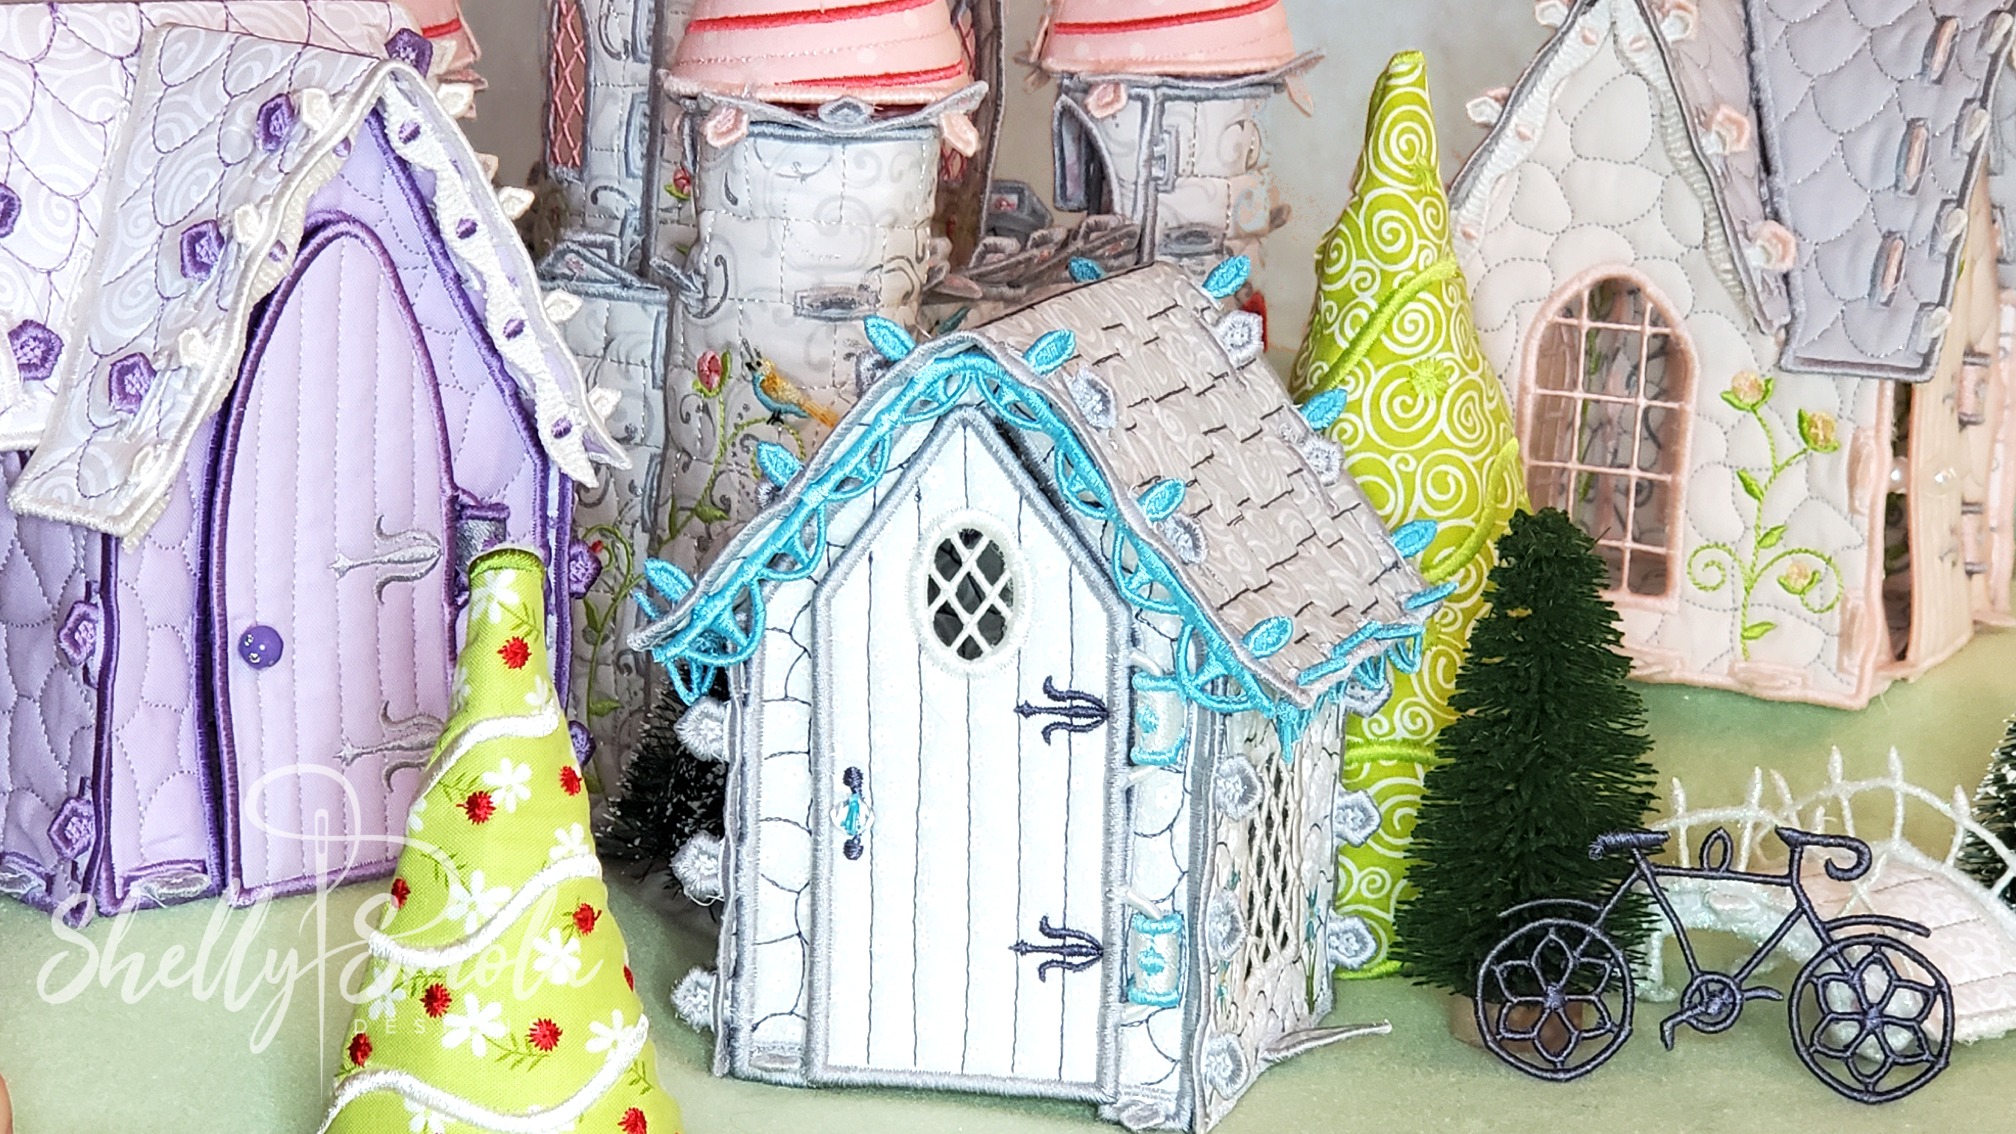 Fairy Tale Cottages by Shelly Smola